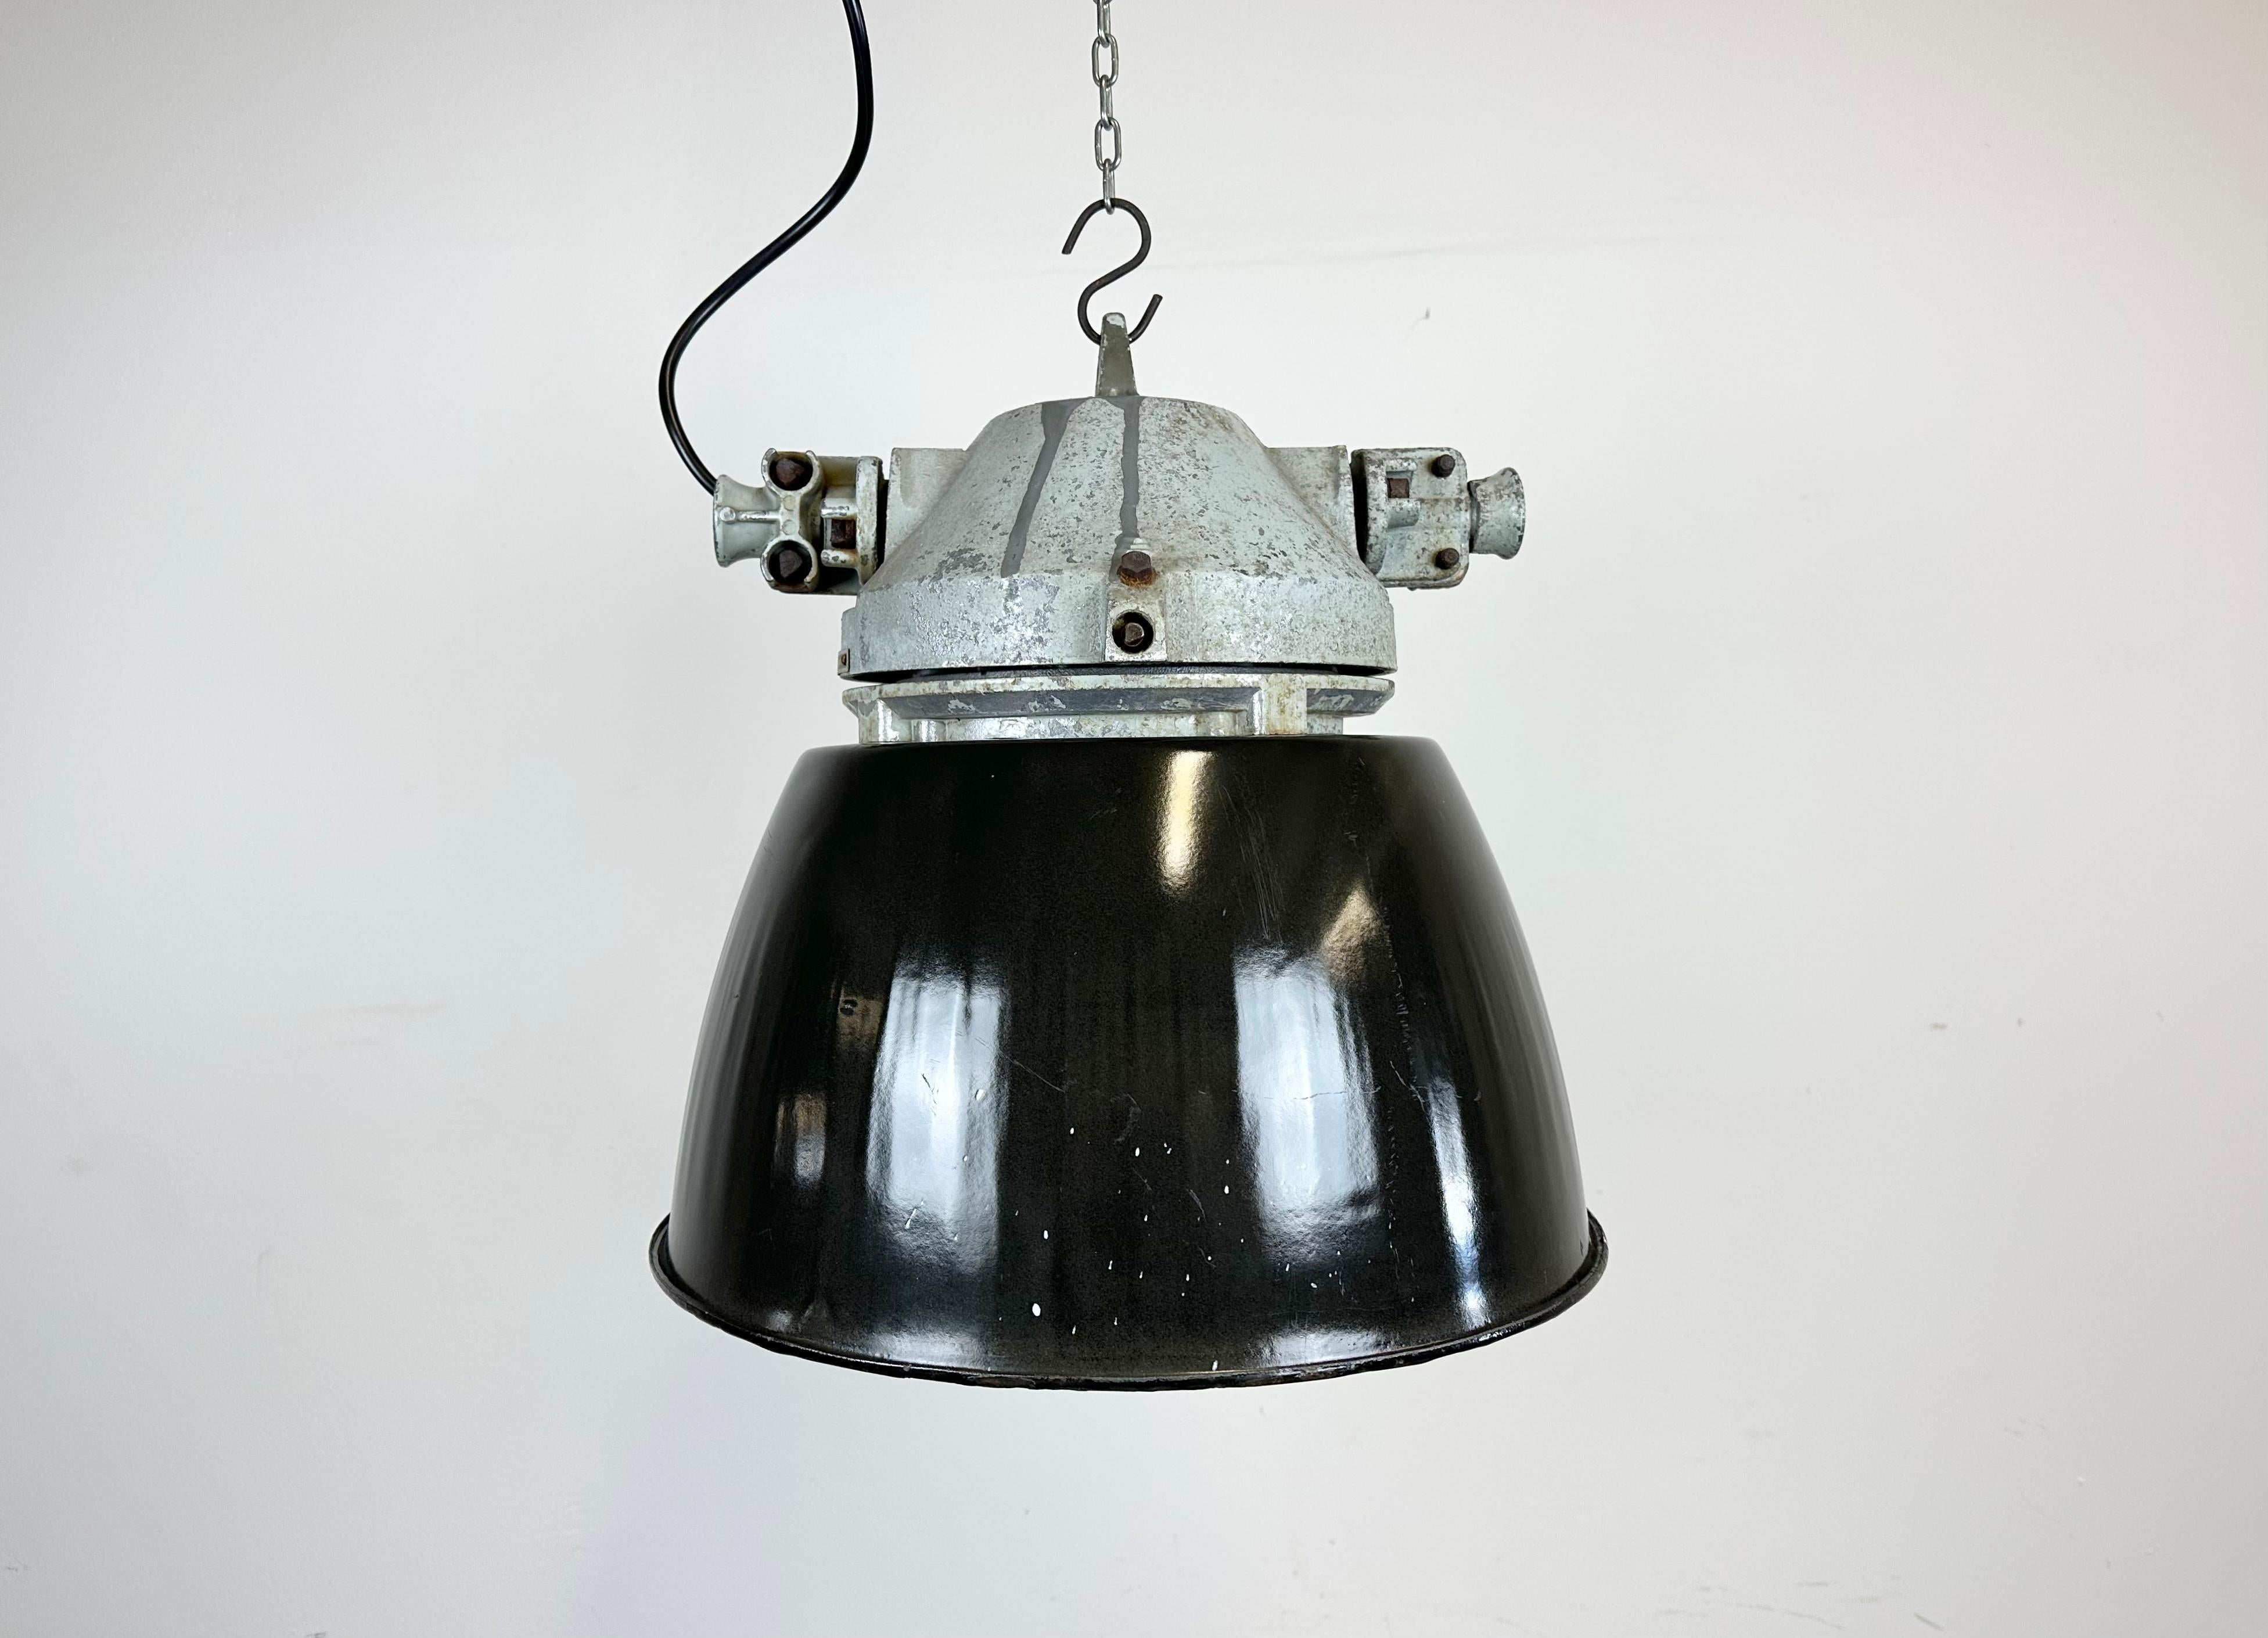 Czech Industrial Grey Explosion Proof Lamp with Black Enameled Shade, 1970s For Sale